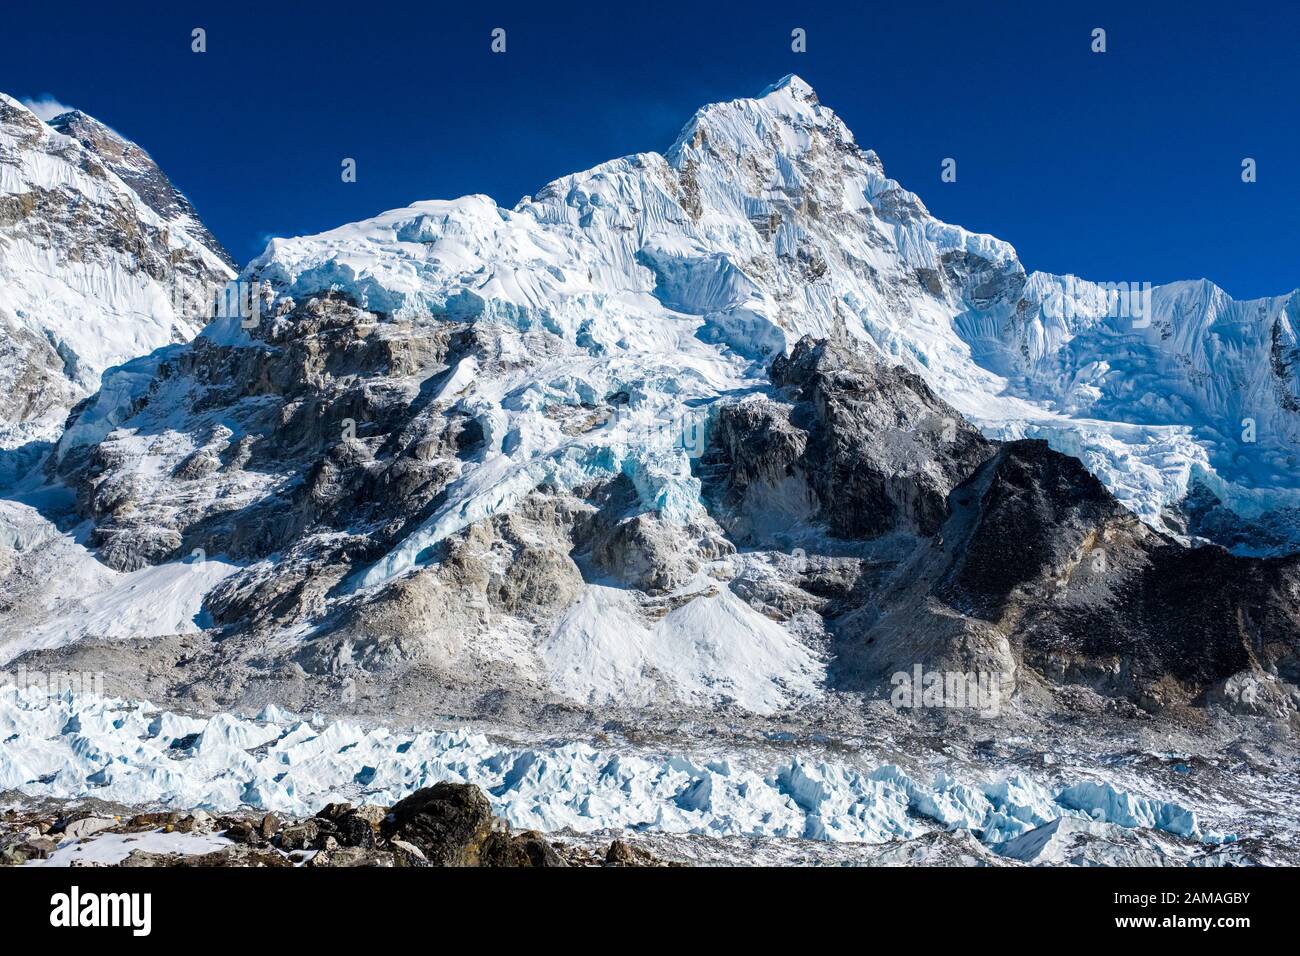 Mountain views from the Khumbu Glacier on the Everest Base Camp Trek in the Nepal Himalayas Stock Photo